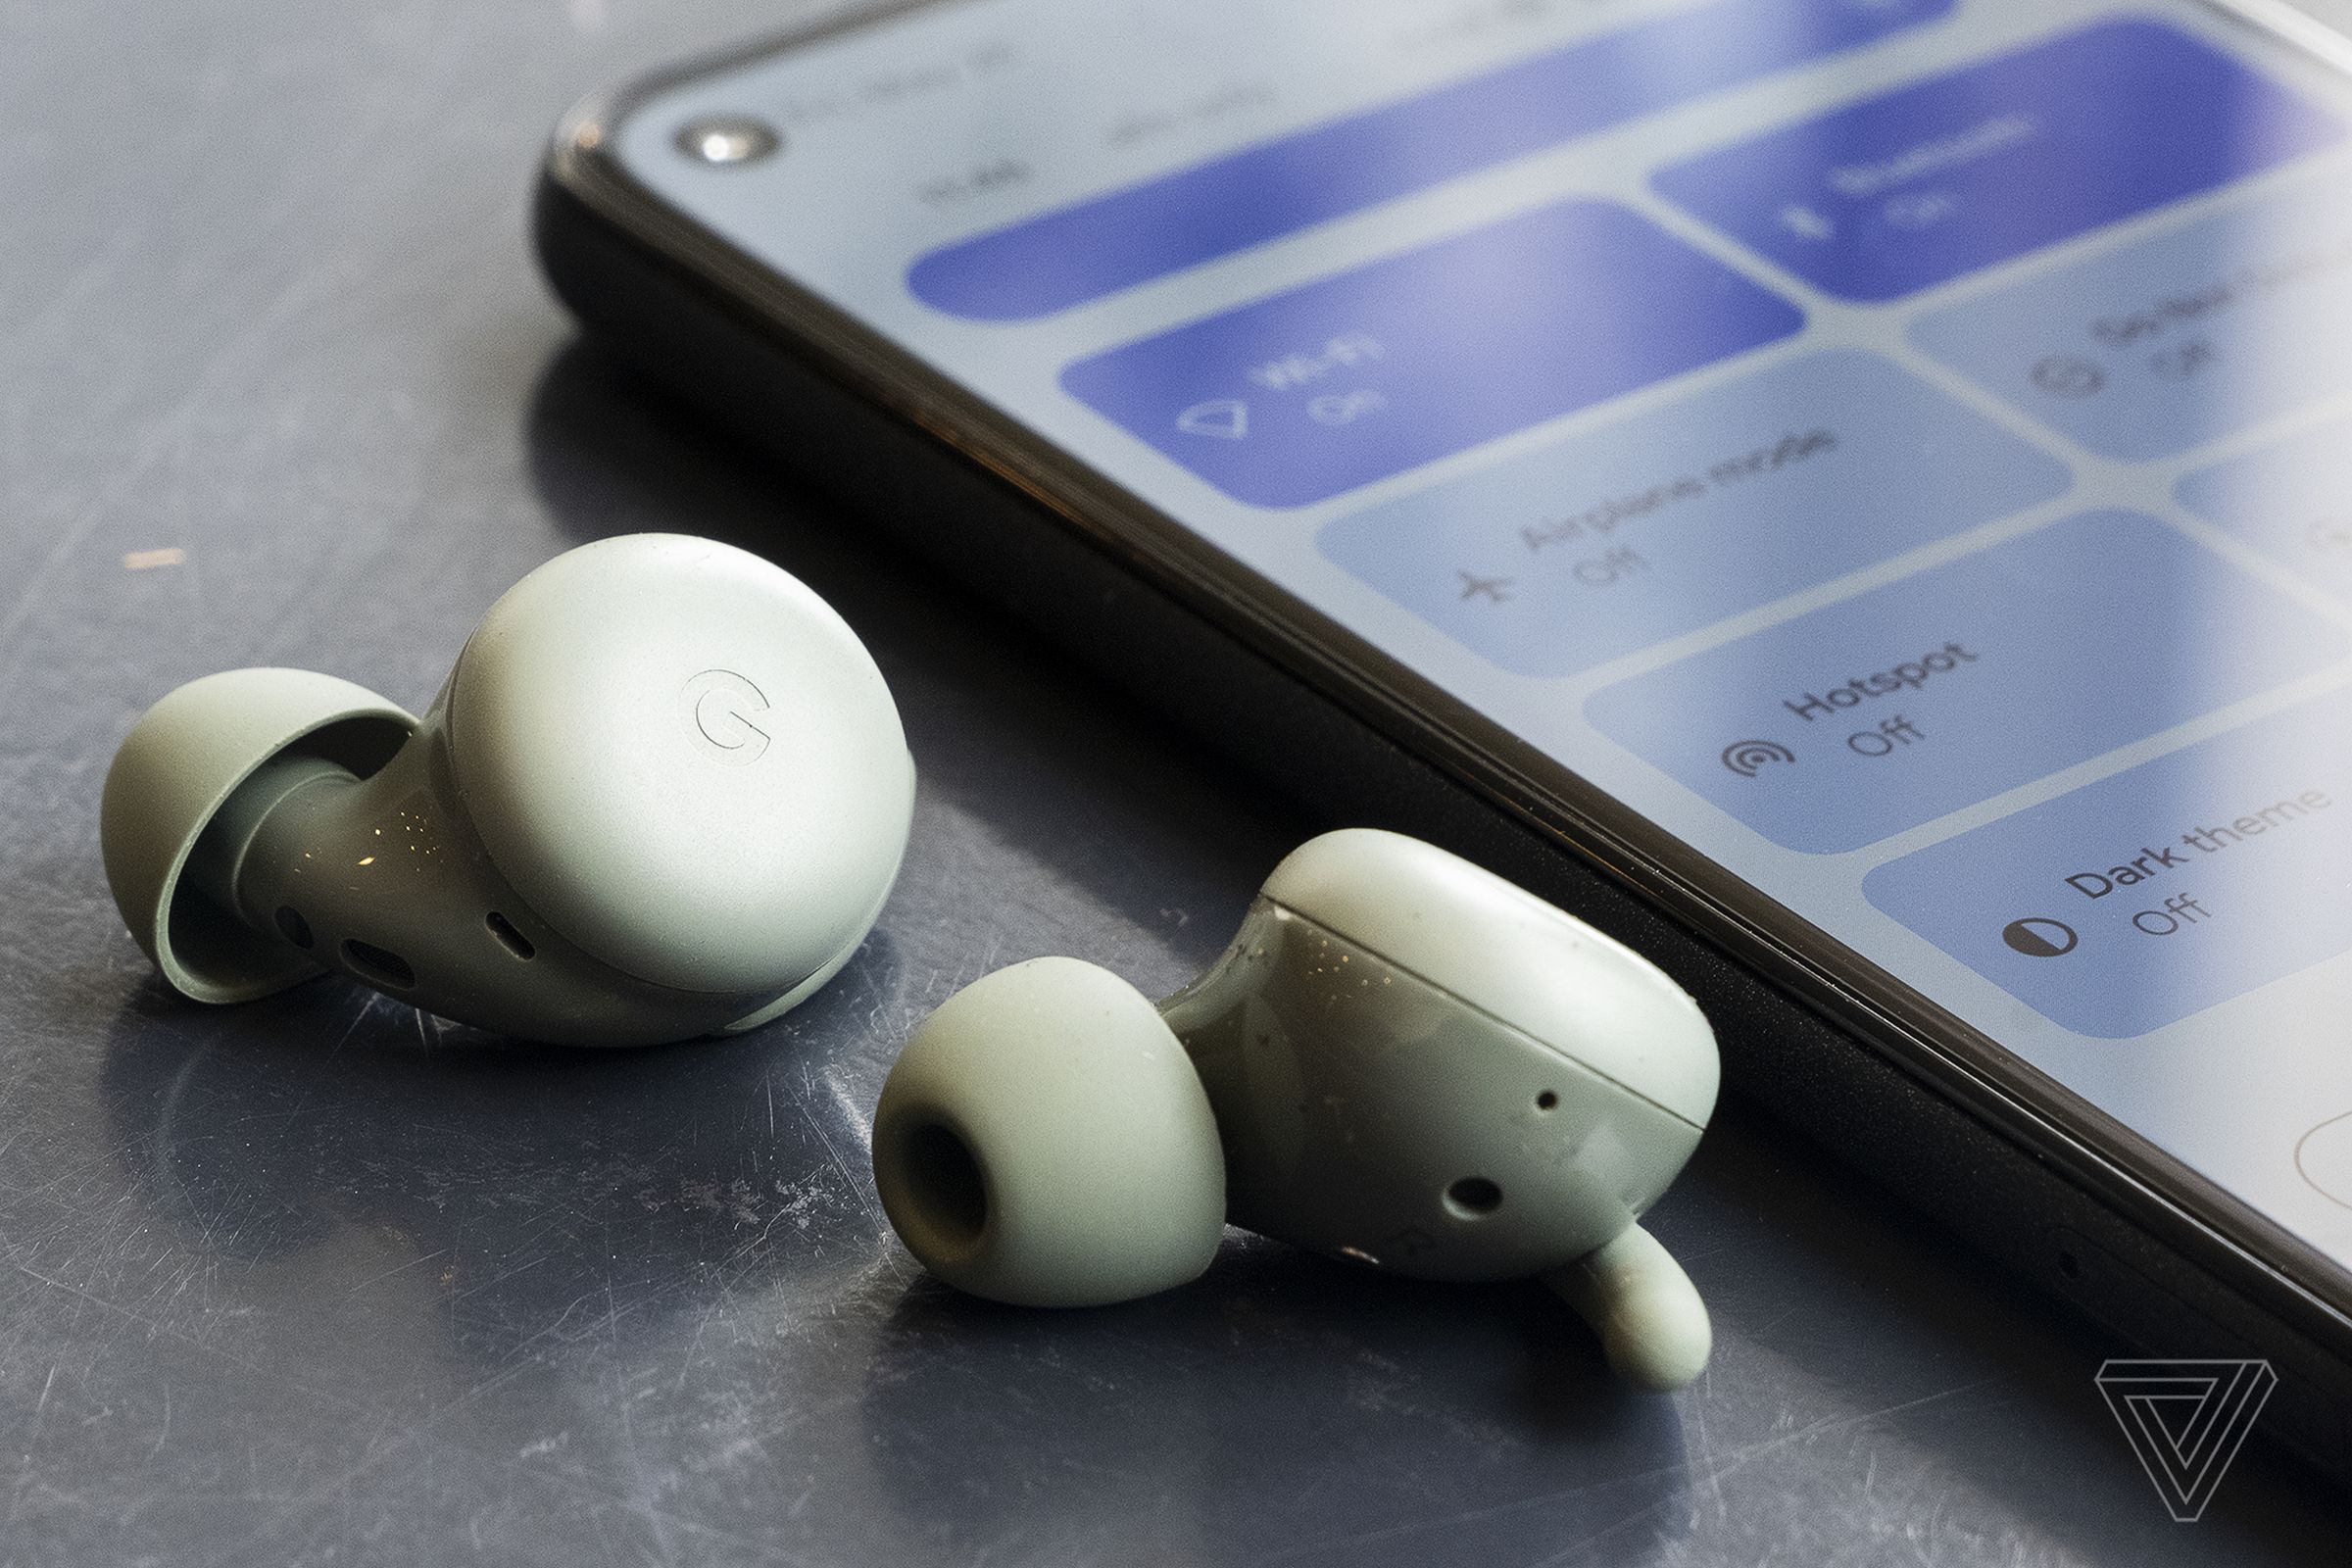 The Pixel Buds A-Series can also connect to Android phones with Fast Pair.  